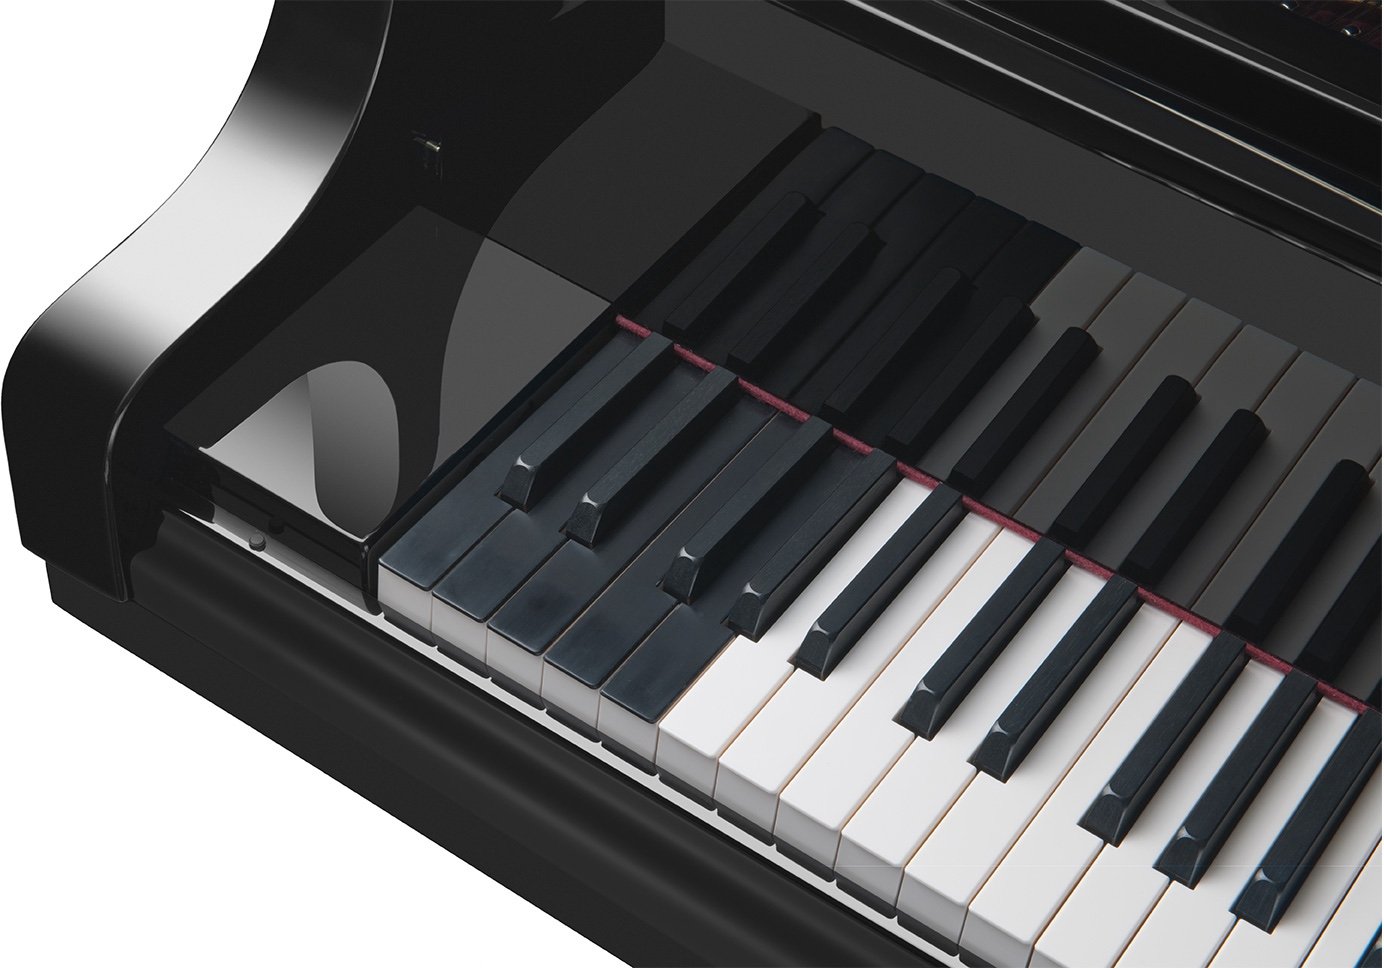 The Bösendorfer 290 Imperial's nine extra keys in the low bass